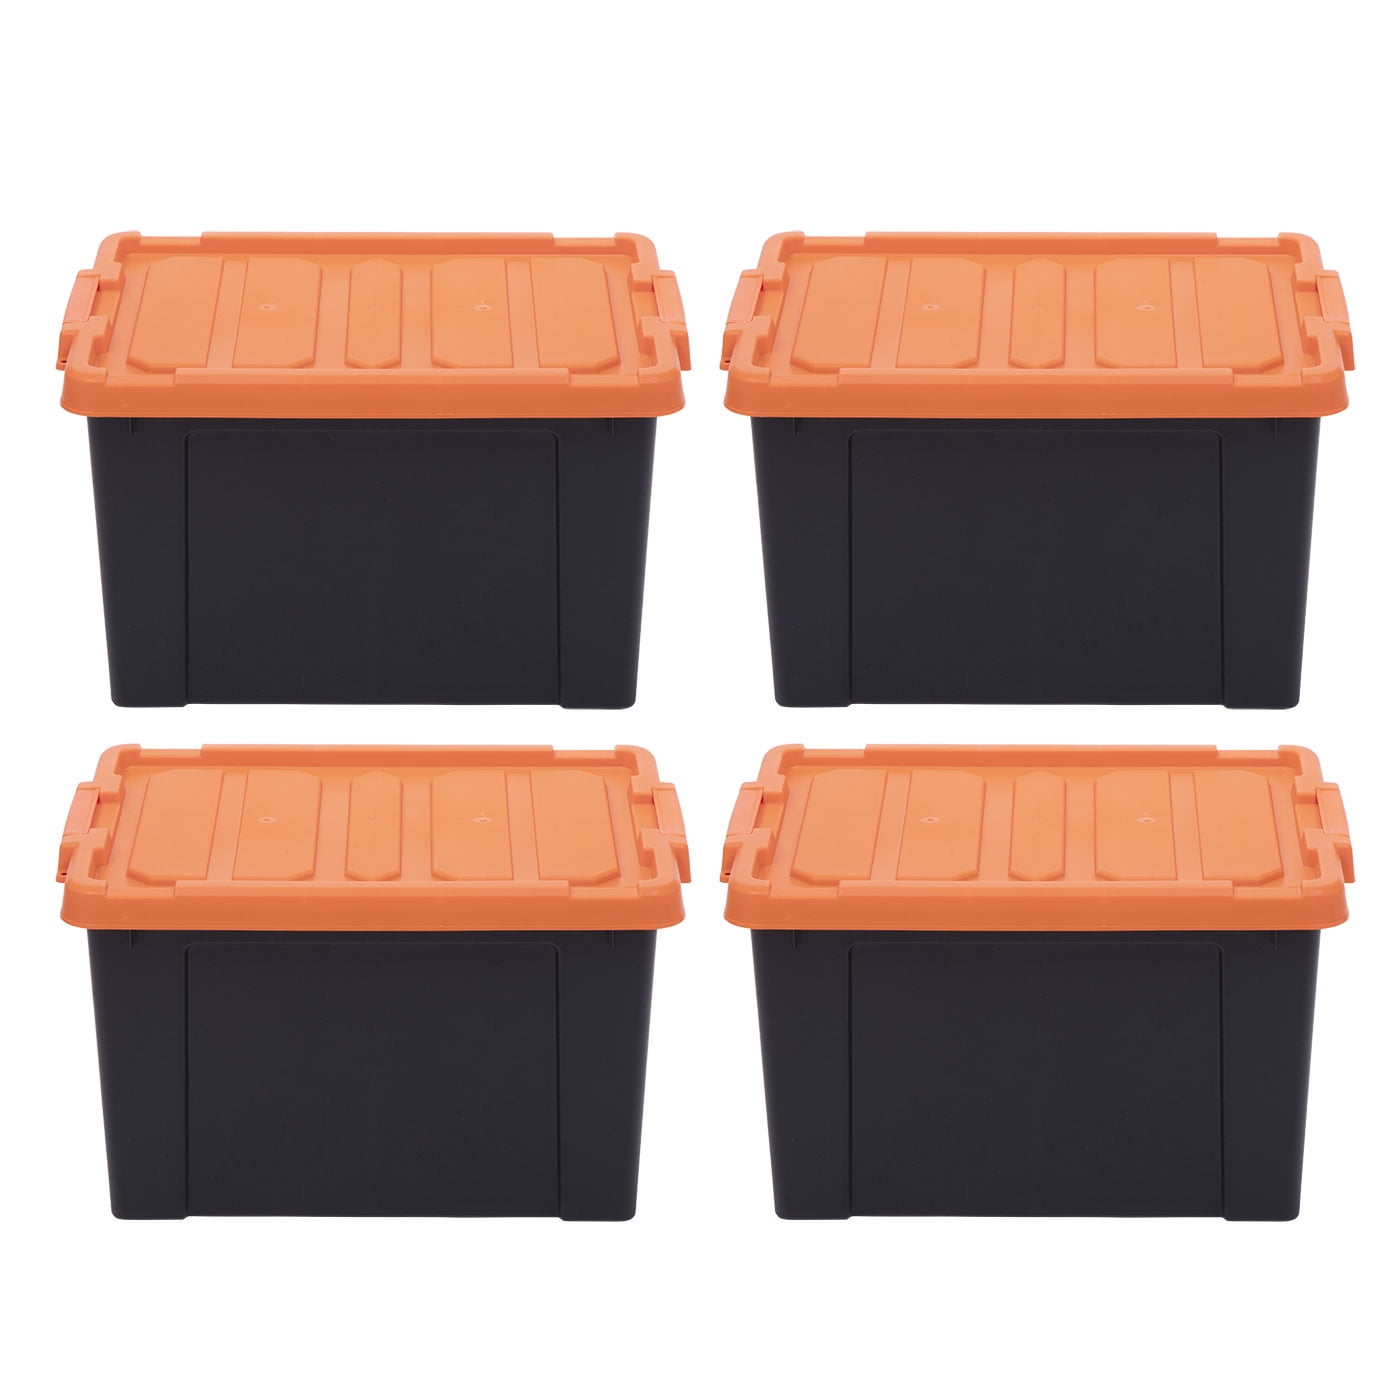 5 New Red Removal Storage Crate Container 60L